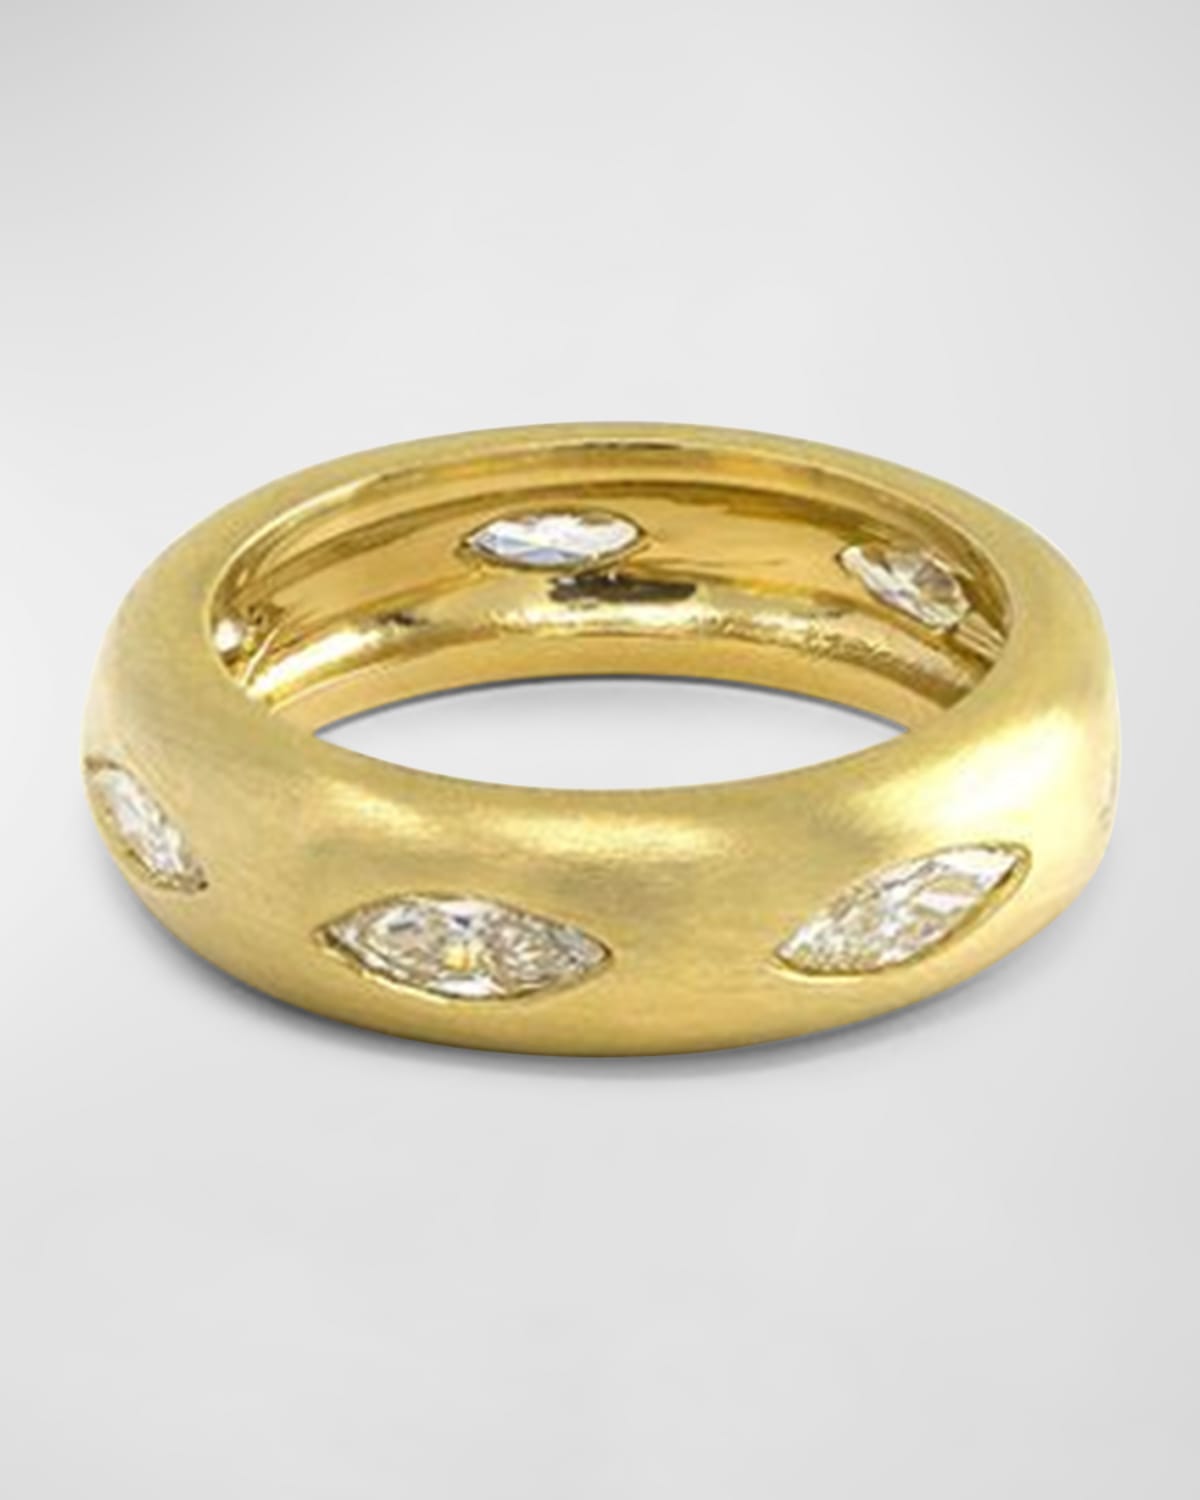 18K Yellow Gold Gypsy Band with Marquise Diamonds, Size 7